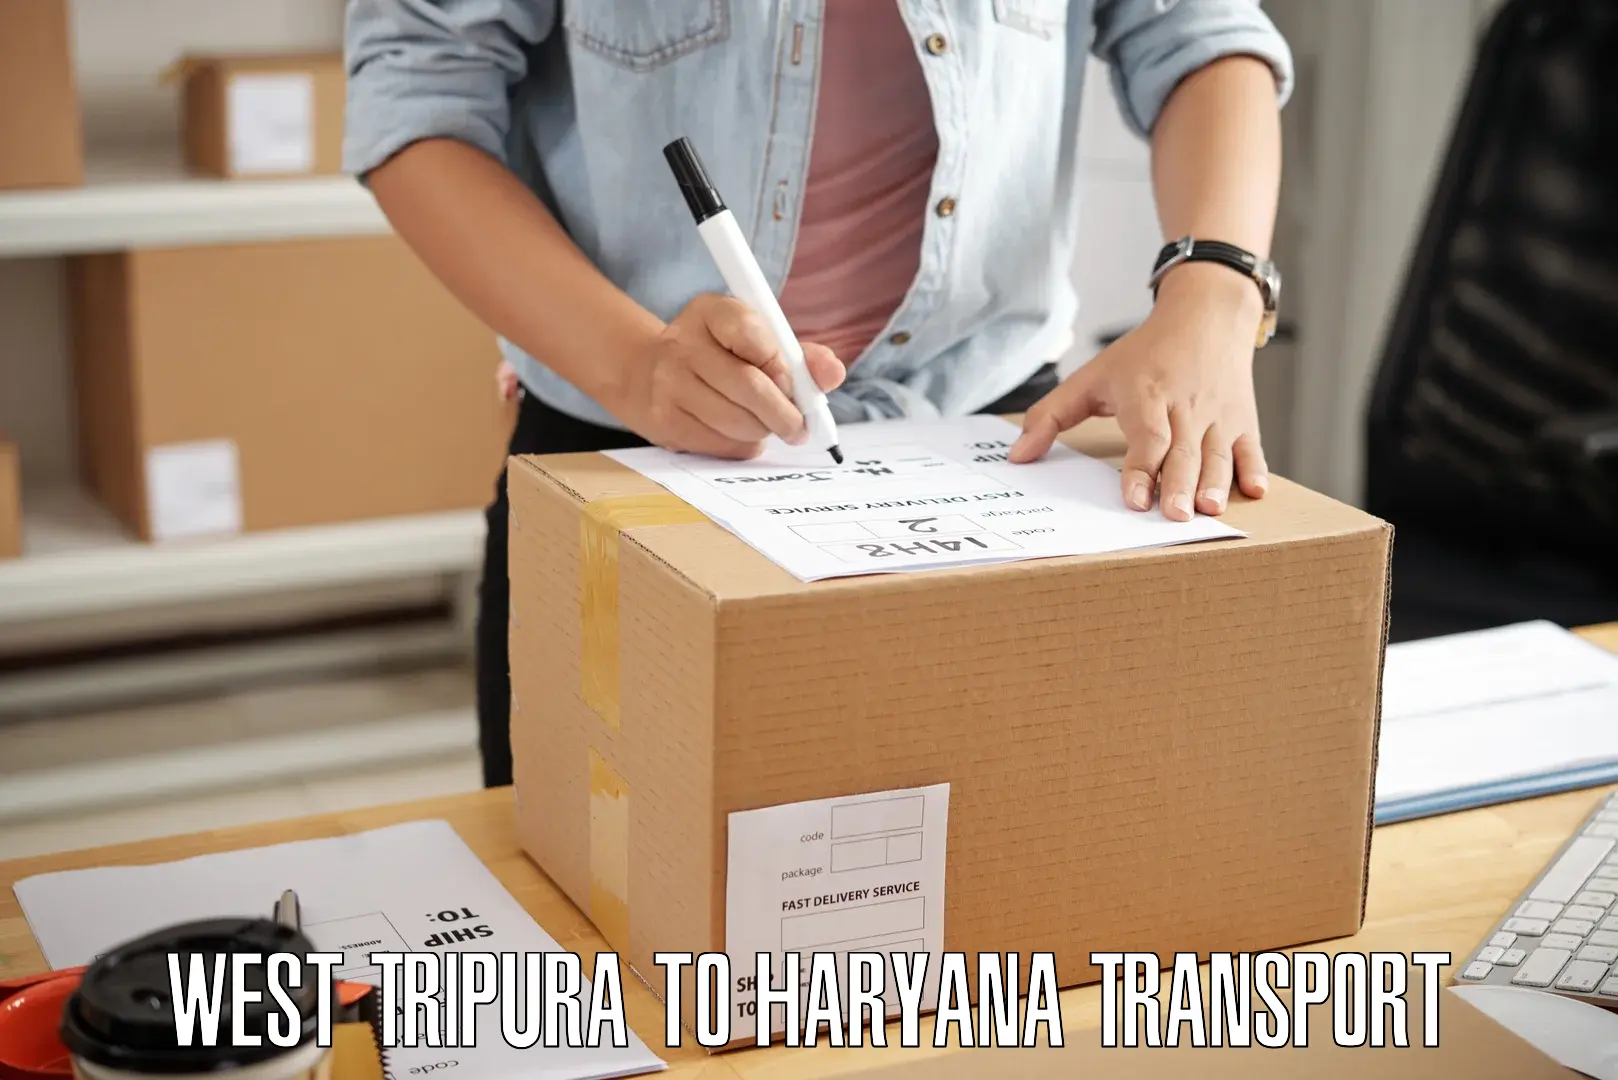 Transport bike from one state to another West Tripura to Panchkula